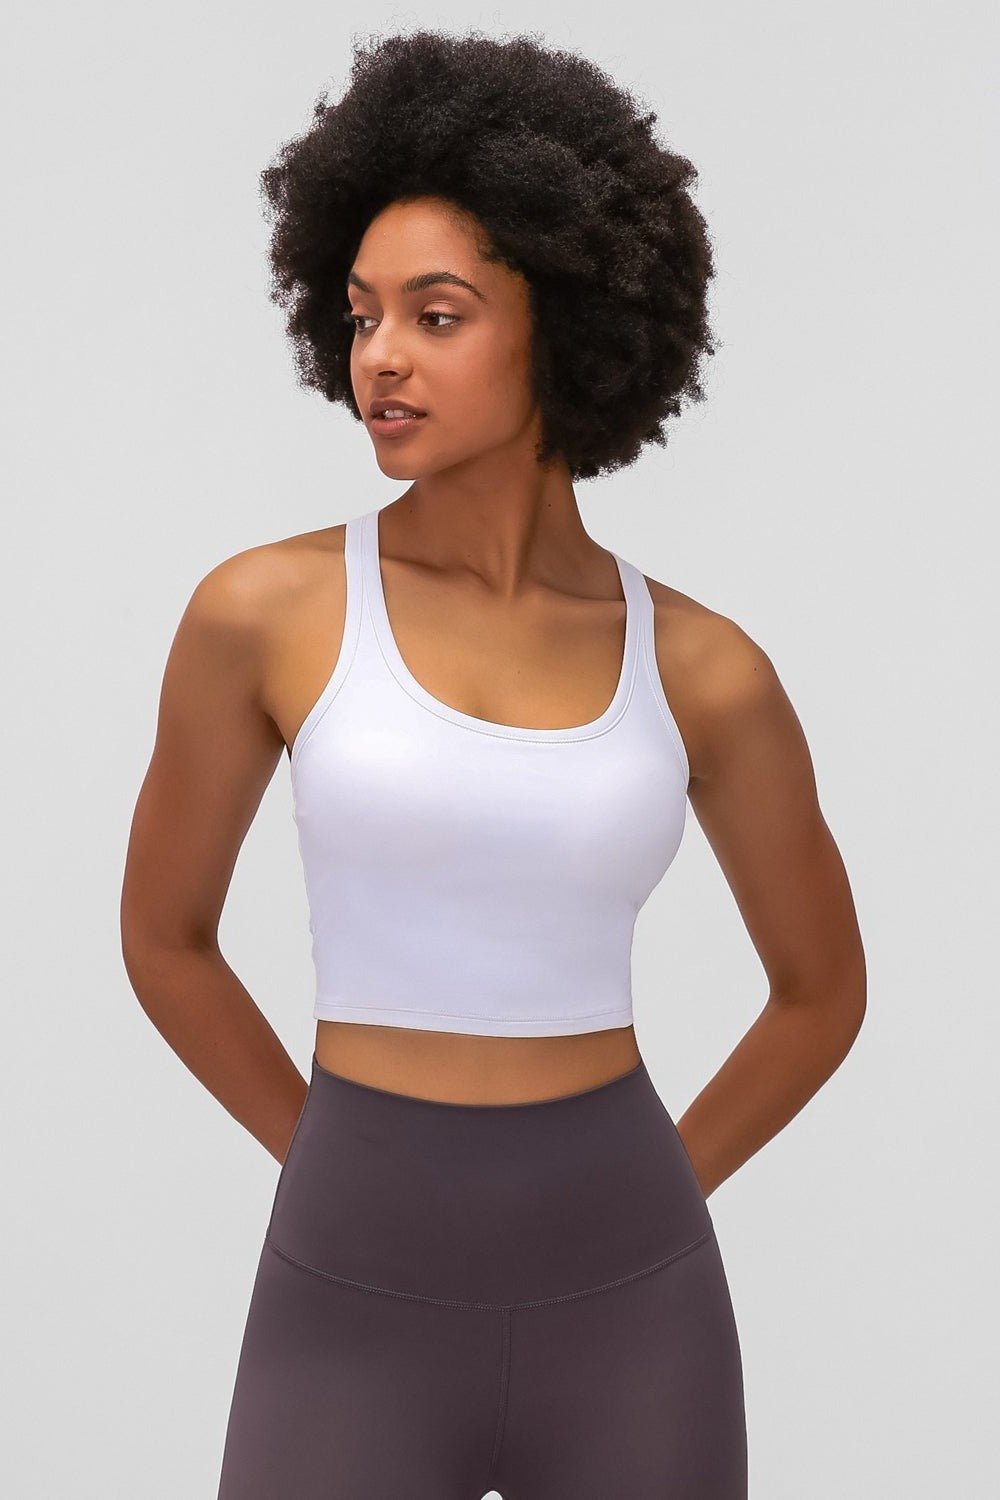 White|SASSYS Shirts & Tops Eclipse Racerback Sports Top